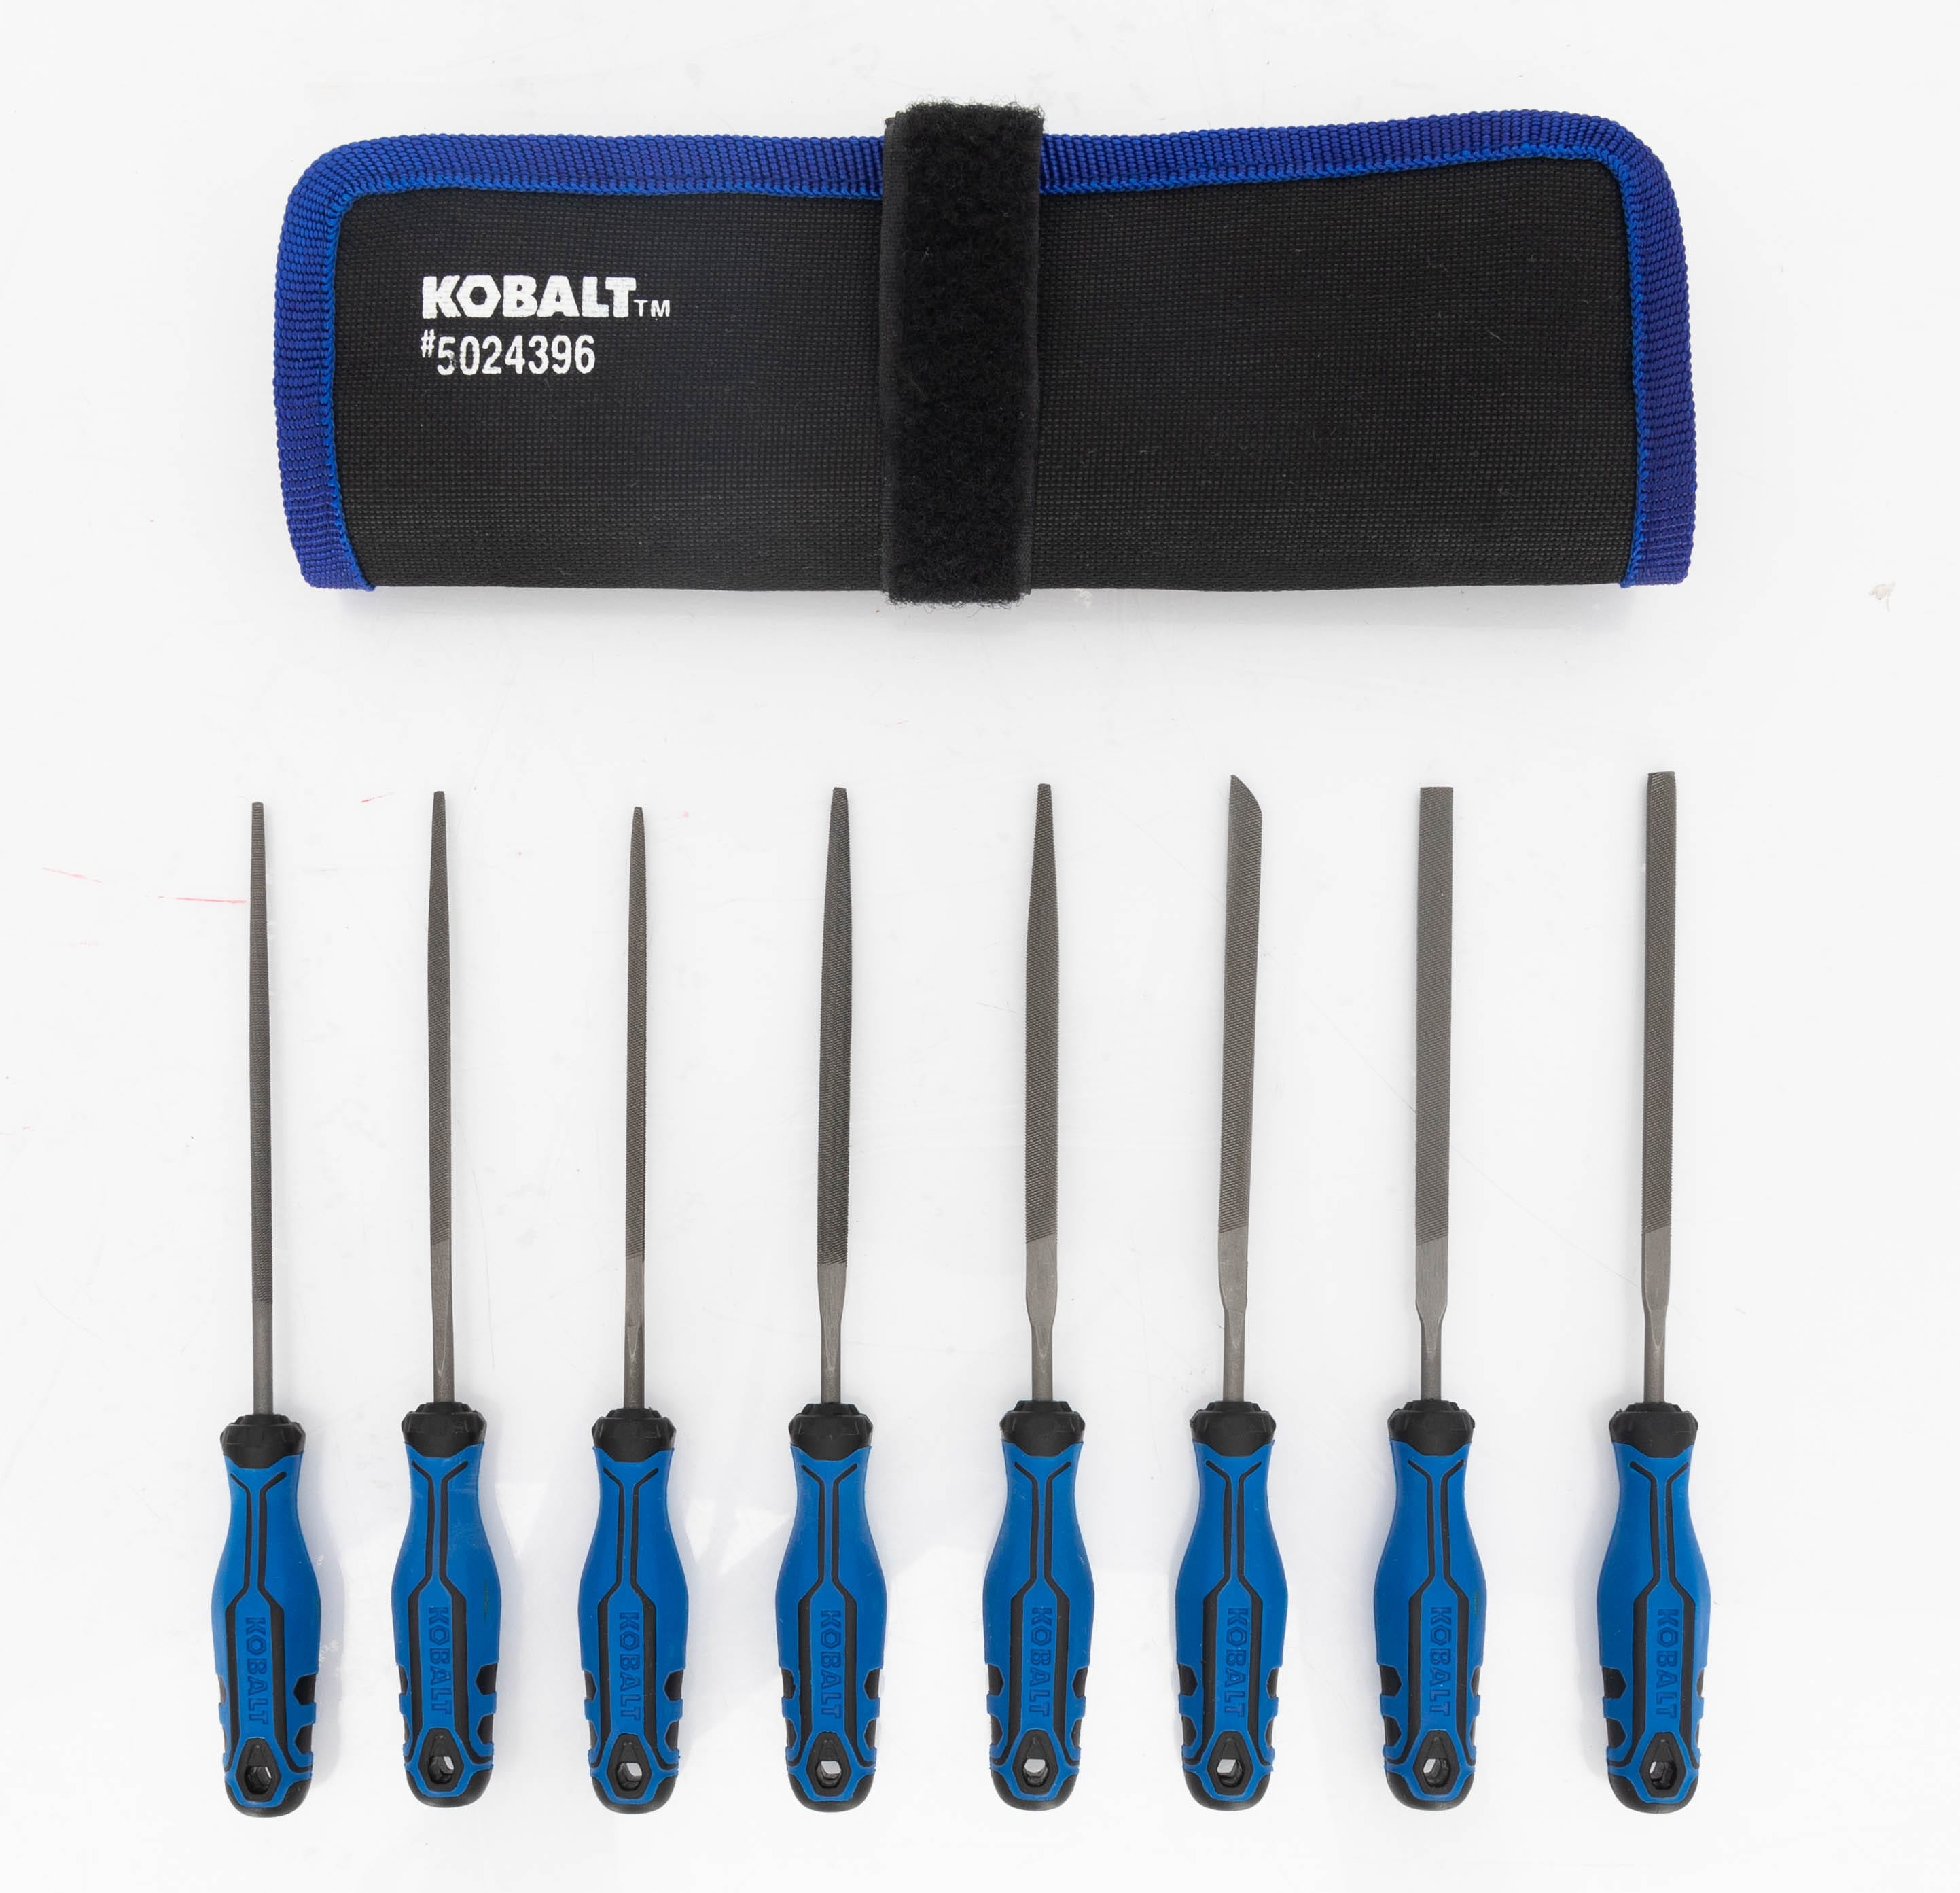 Kobalt 5.25-in Micro Precision Tooth File Set File